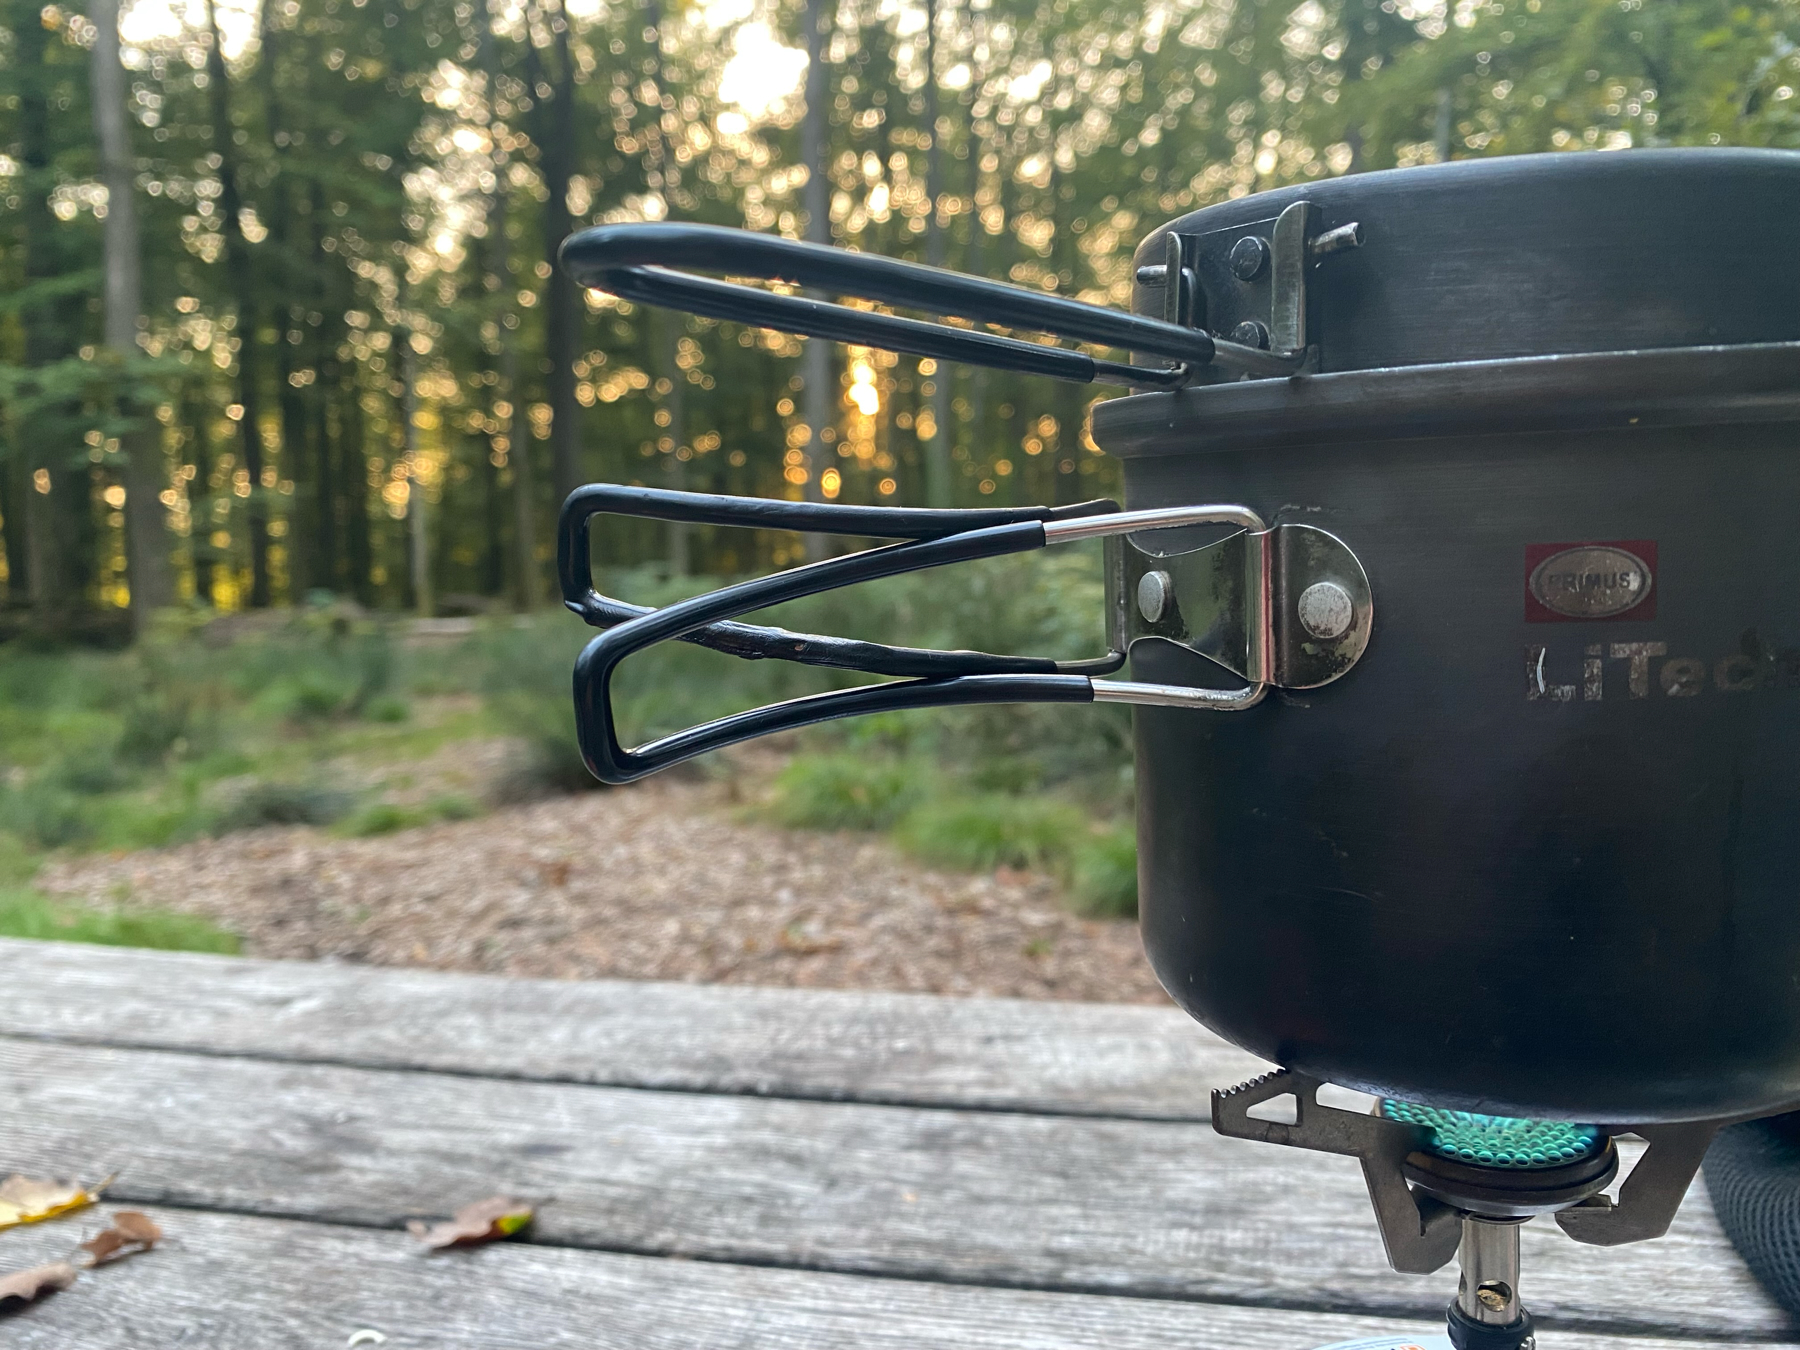 camping pot on camping stove with a blurry Forrest in the back, the low sun peeking through the trees